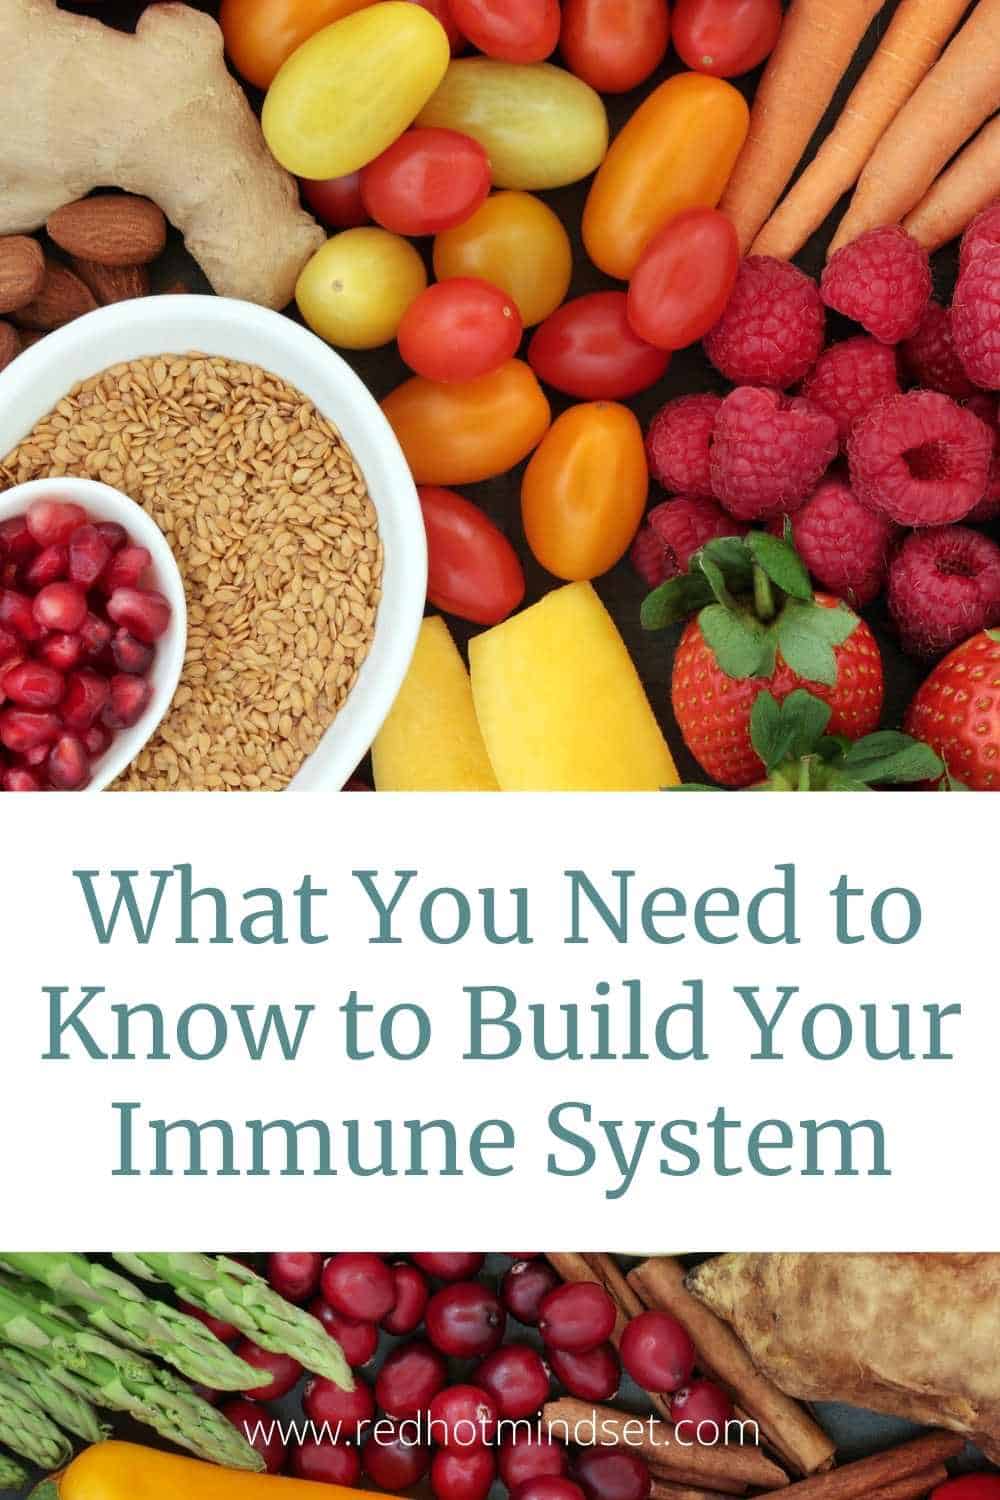 What You Need to Know to Build Your Immune System